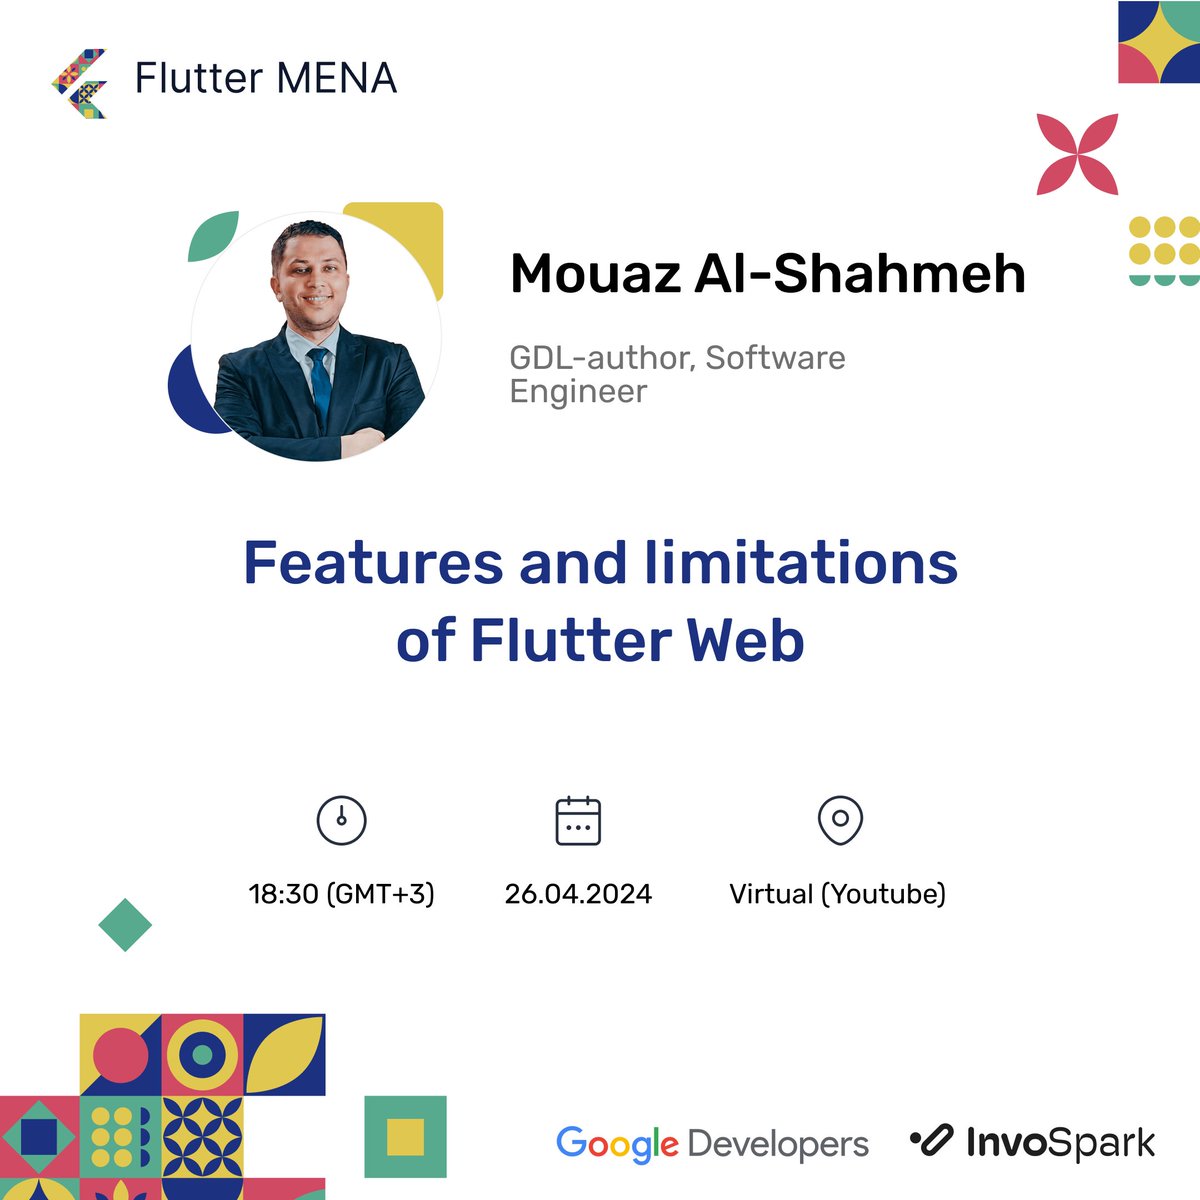 Join us for an insightful session on Flutter Web! 🚀 @mouaz_m_shahmeh , GDL-author and software engineer, will be diving into the features and limitations of Flutter for web development. Don't miss out! 🖥️

📅 Date: April 26, 2024 
⏰ Time: 18:30 (GMT+3)

#FlutterMENA